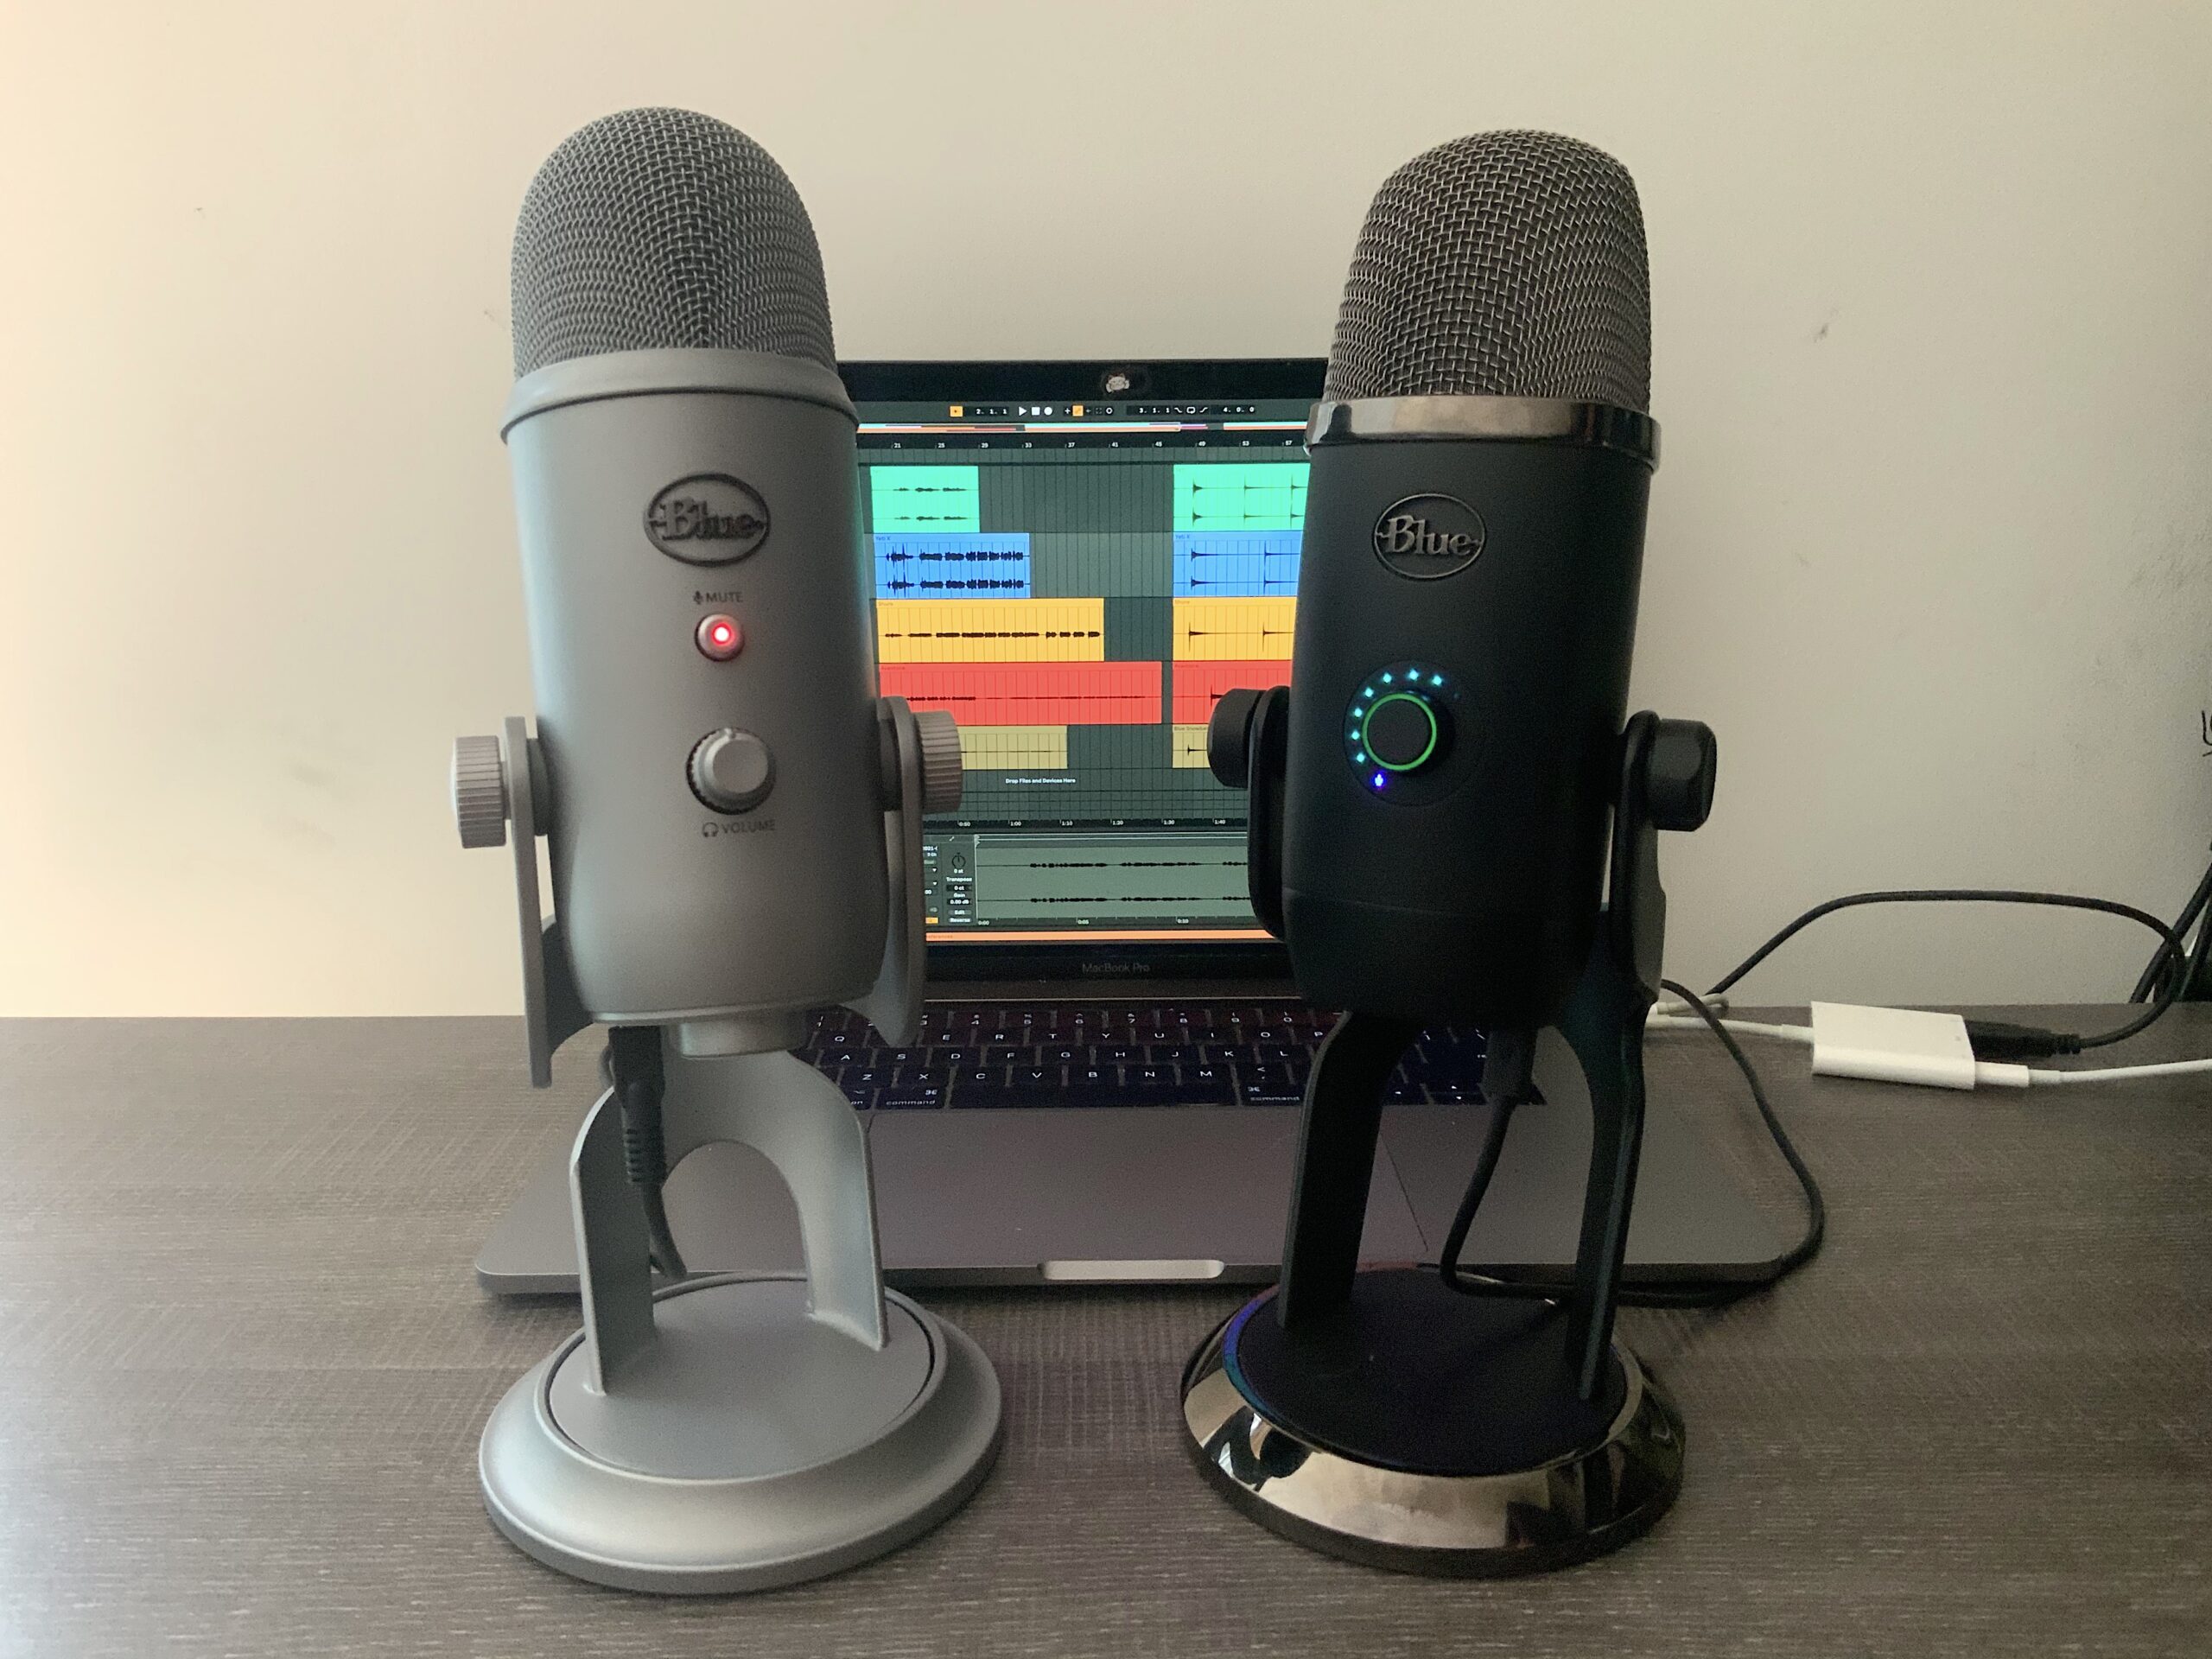 Blue Yeti X Streaming Microphone - Black Out 